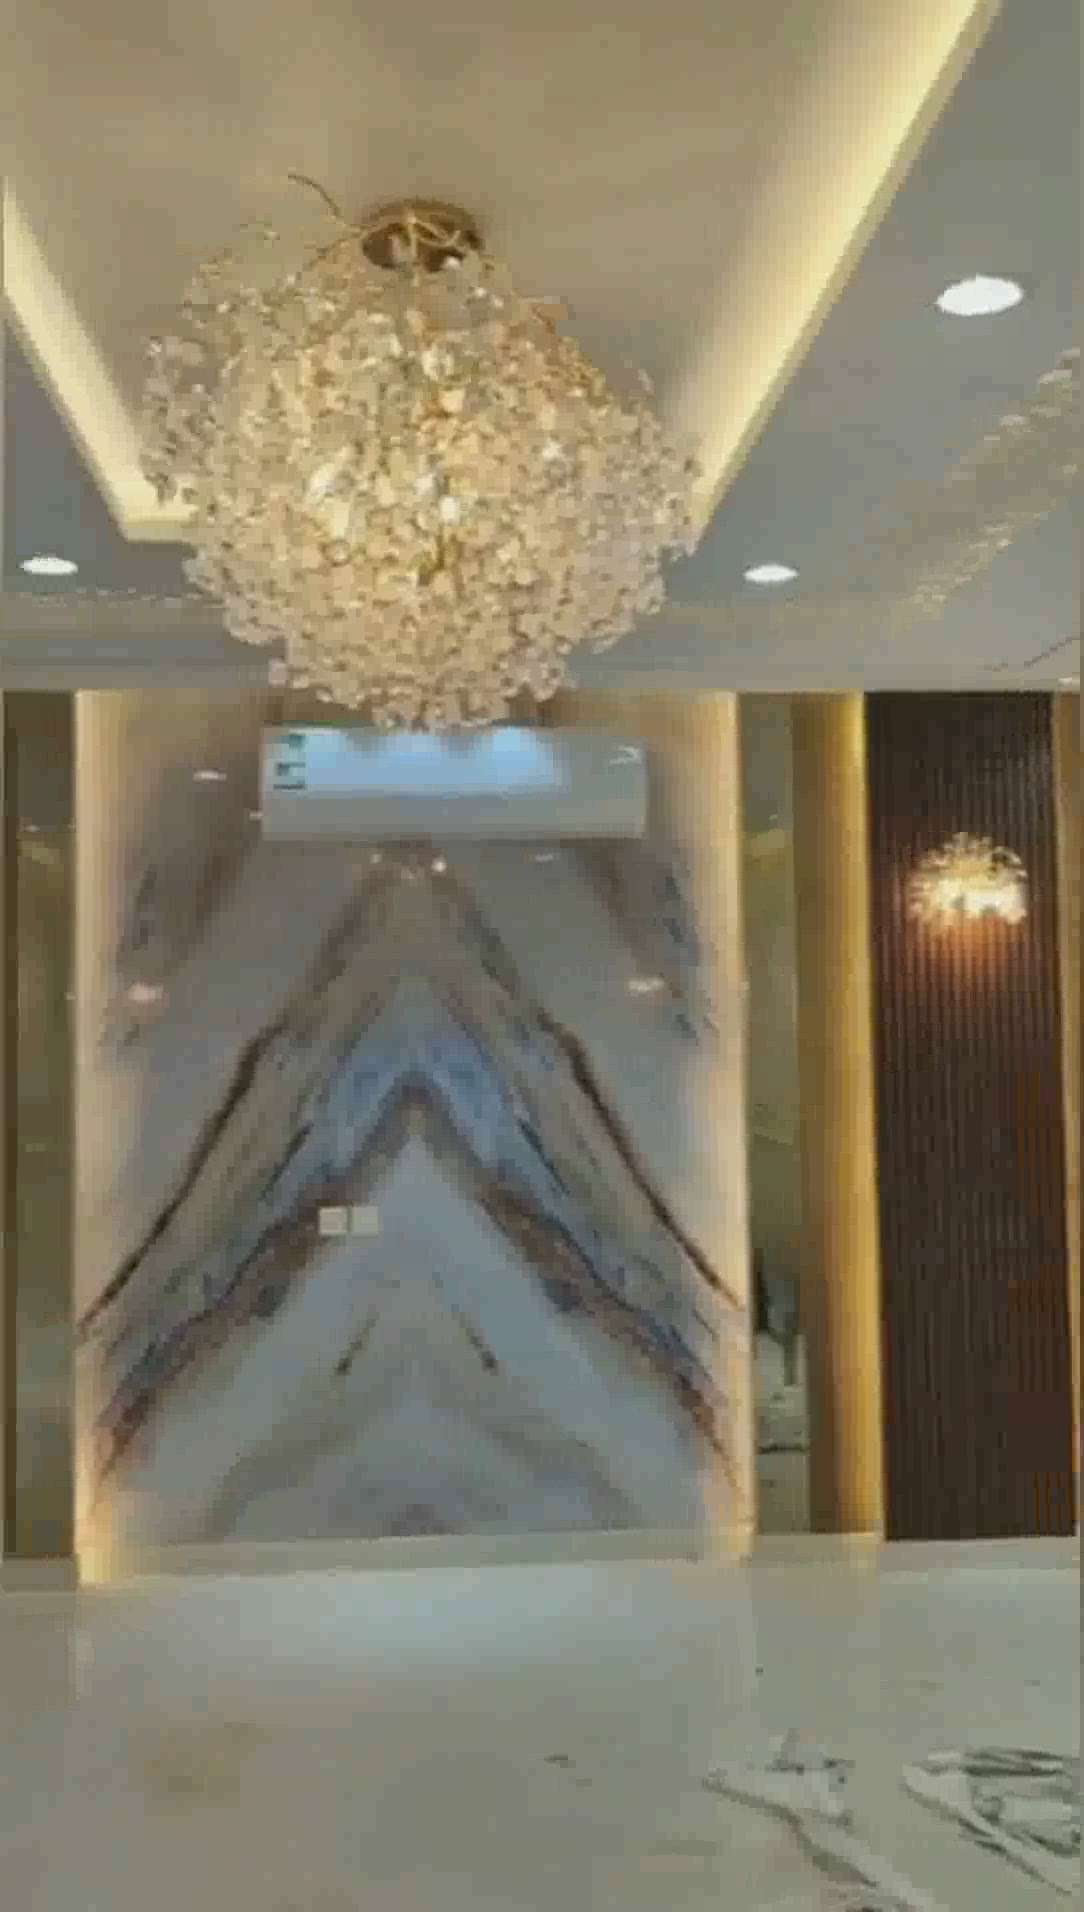 French walls, wall trims with fancy Chandelier, eye catching False Ceiling, Marble tv panels.
#construction #constructioncompany #civilengineer #civilwork #RMC #cement #slabconcretingwork #slabcasting #WallPutty #wallplaster #Brickwork #concreteblock #AACblock #homepainting #painting #murals #trending #hashtag #hashtags #centring #plycentring #building #garden #landscaping #plants #wallpaper #aluminumpartition #wooden #woodenwork #newdesigns #creative #walltrim #FrenchWindows #chandeliers #tvpanel #wainscoat  #attractive #cooldesigns #architect #interiordesign #trendingdesigns  #bhopalcontractor  #interior_designer_in_bhopal #bhopalinteriors  #bhopalfurnitures #radiantstarconstruction